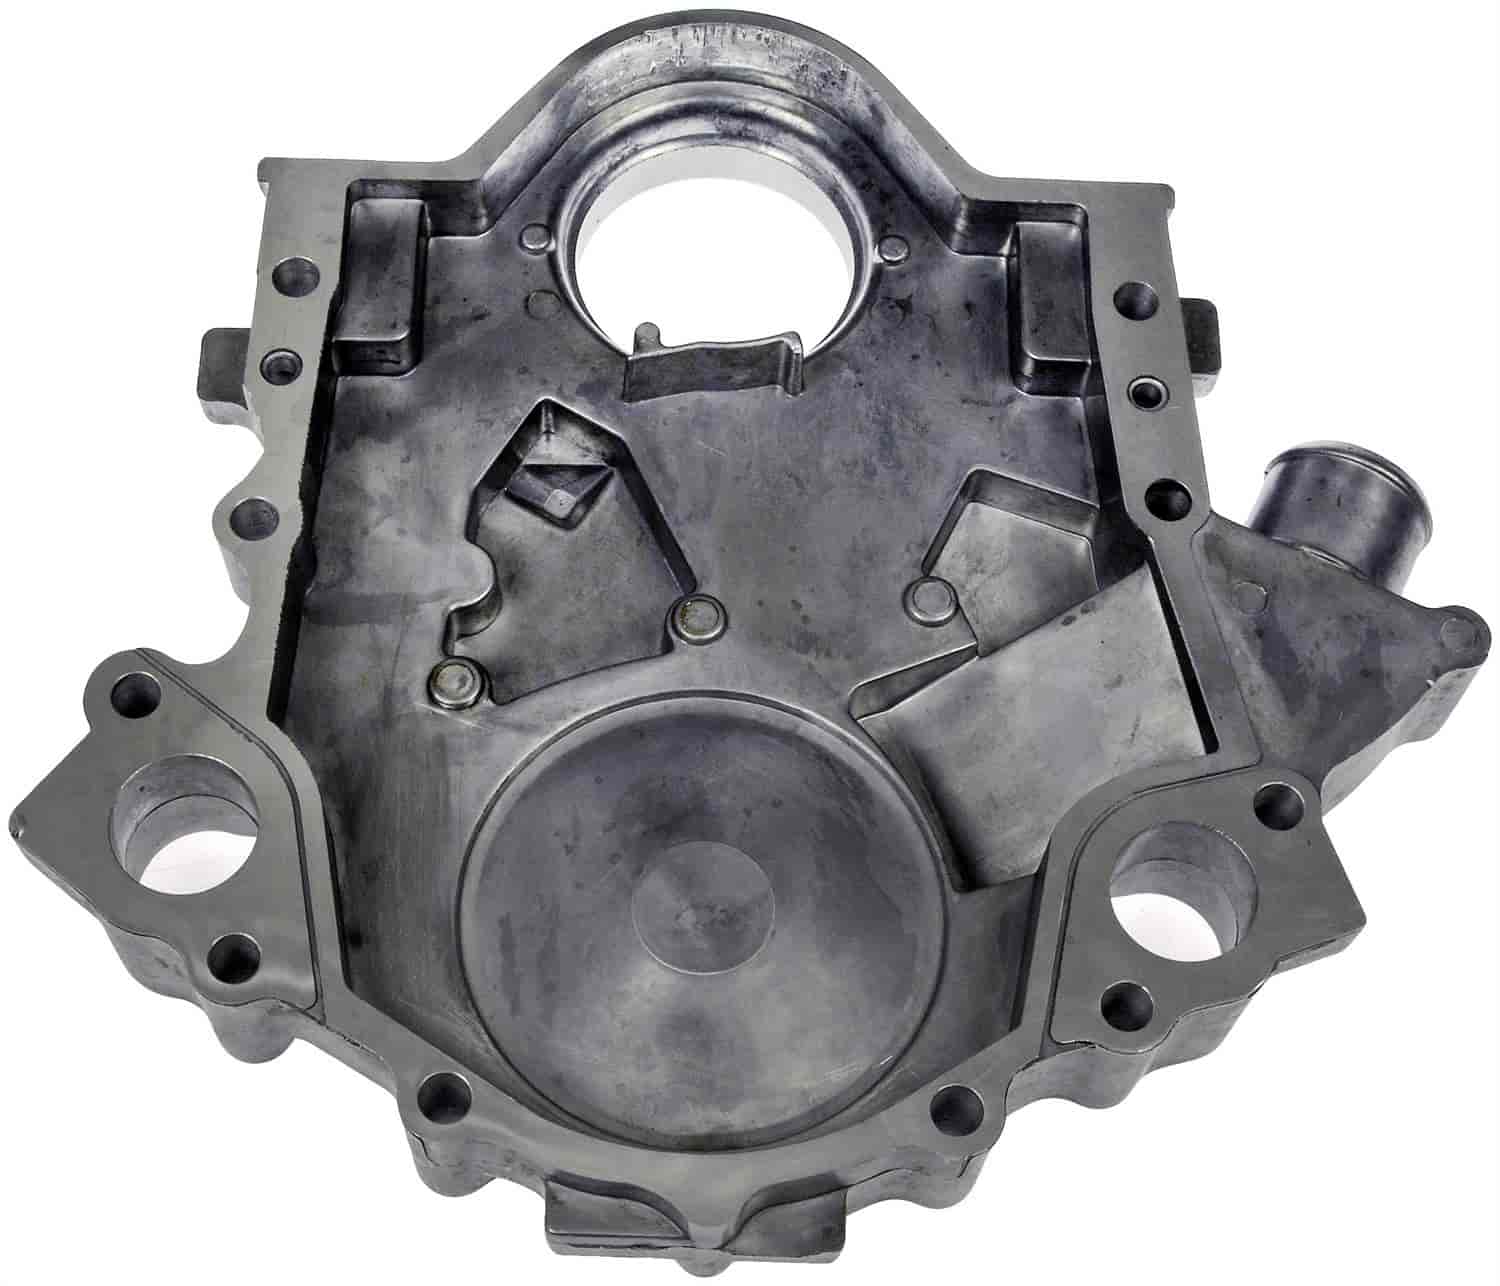 Timing Cover Kit for 1990-2008 Ford 3.0L, 1990-2005